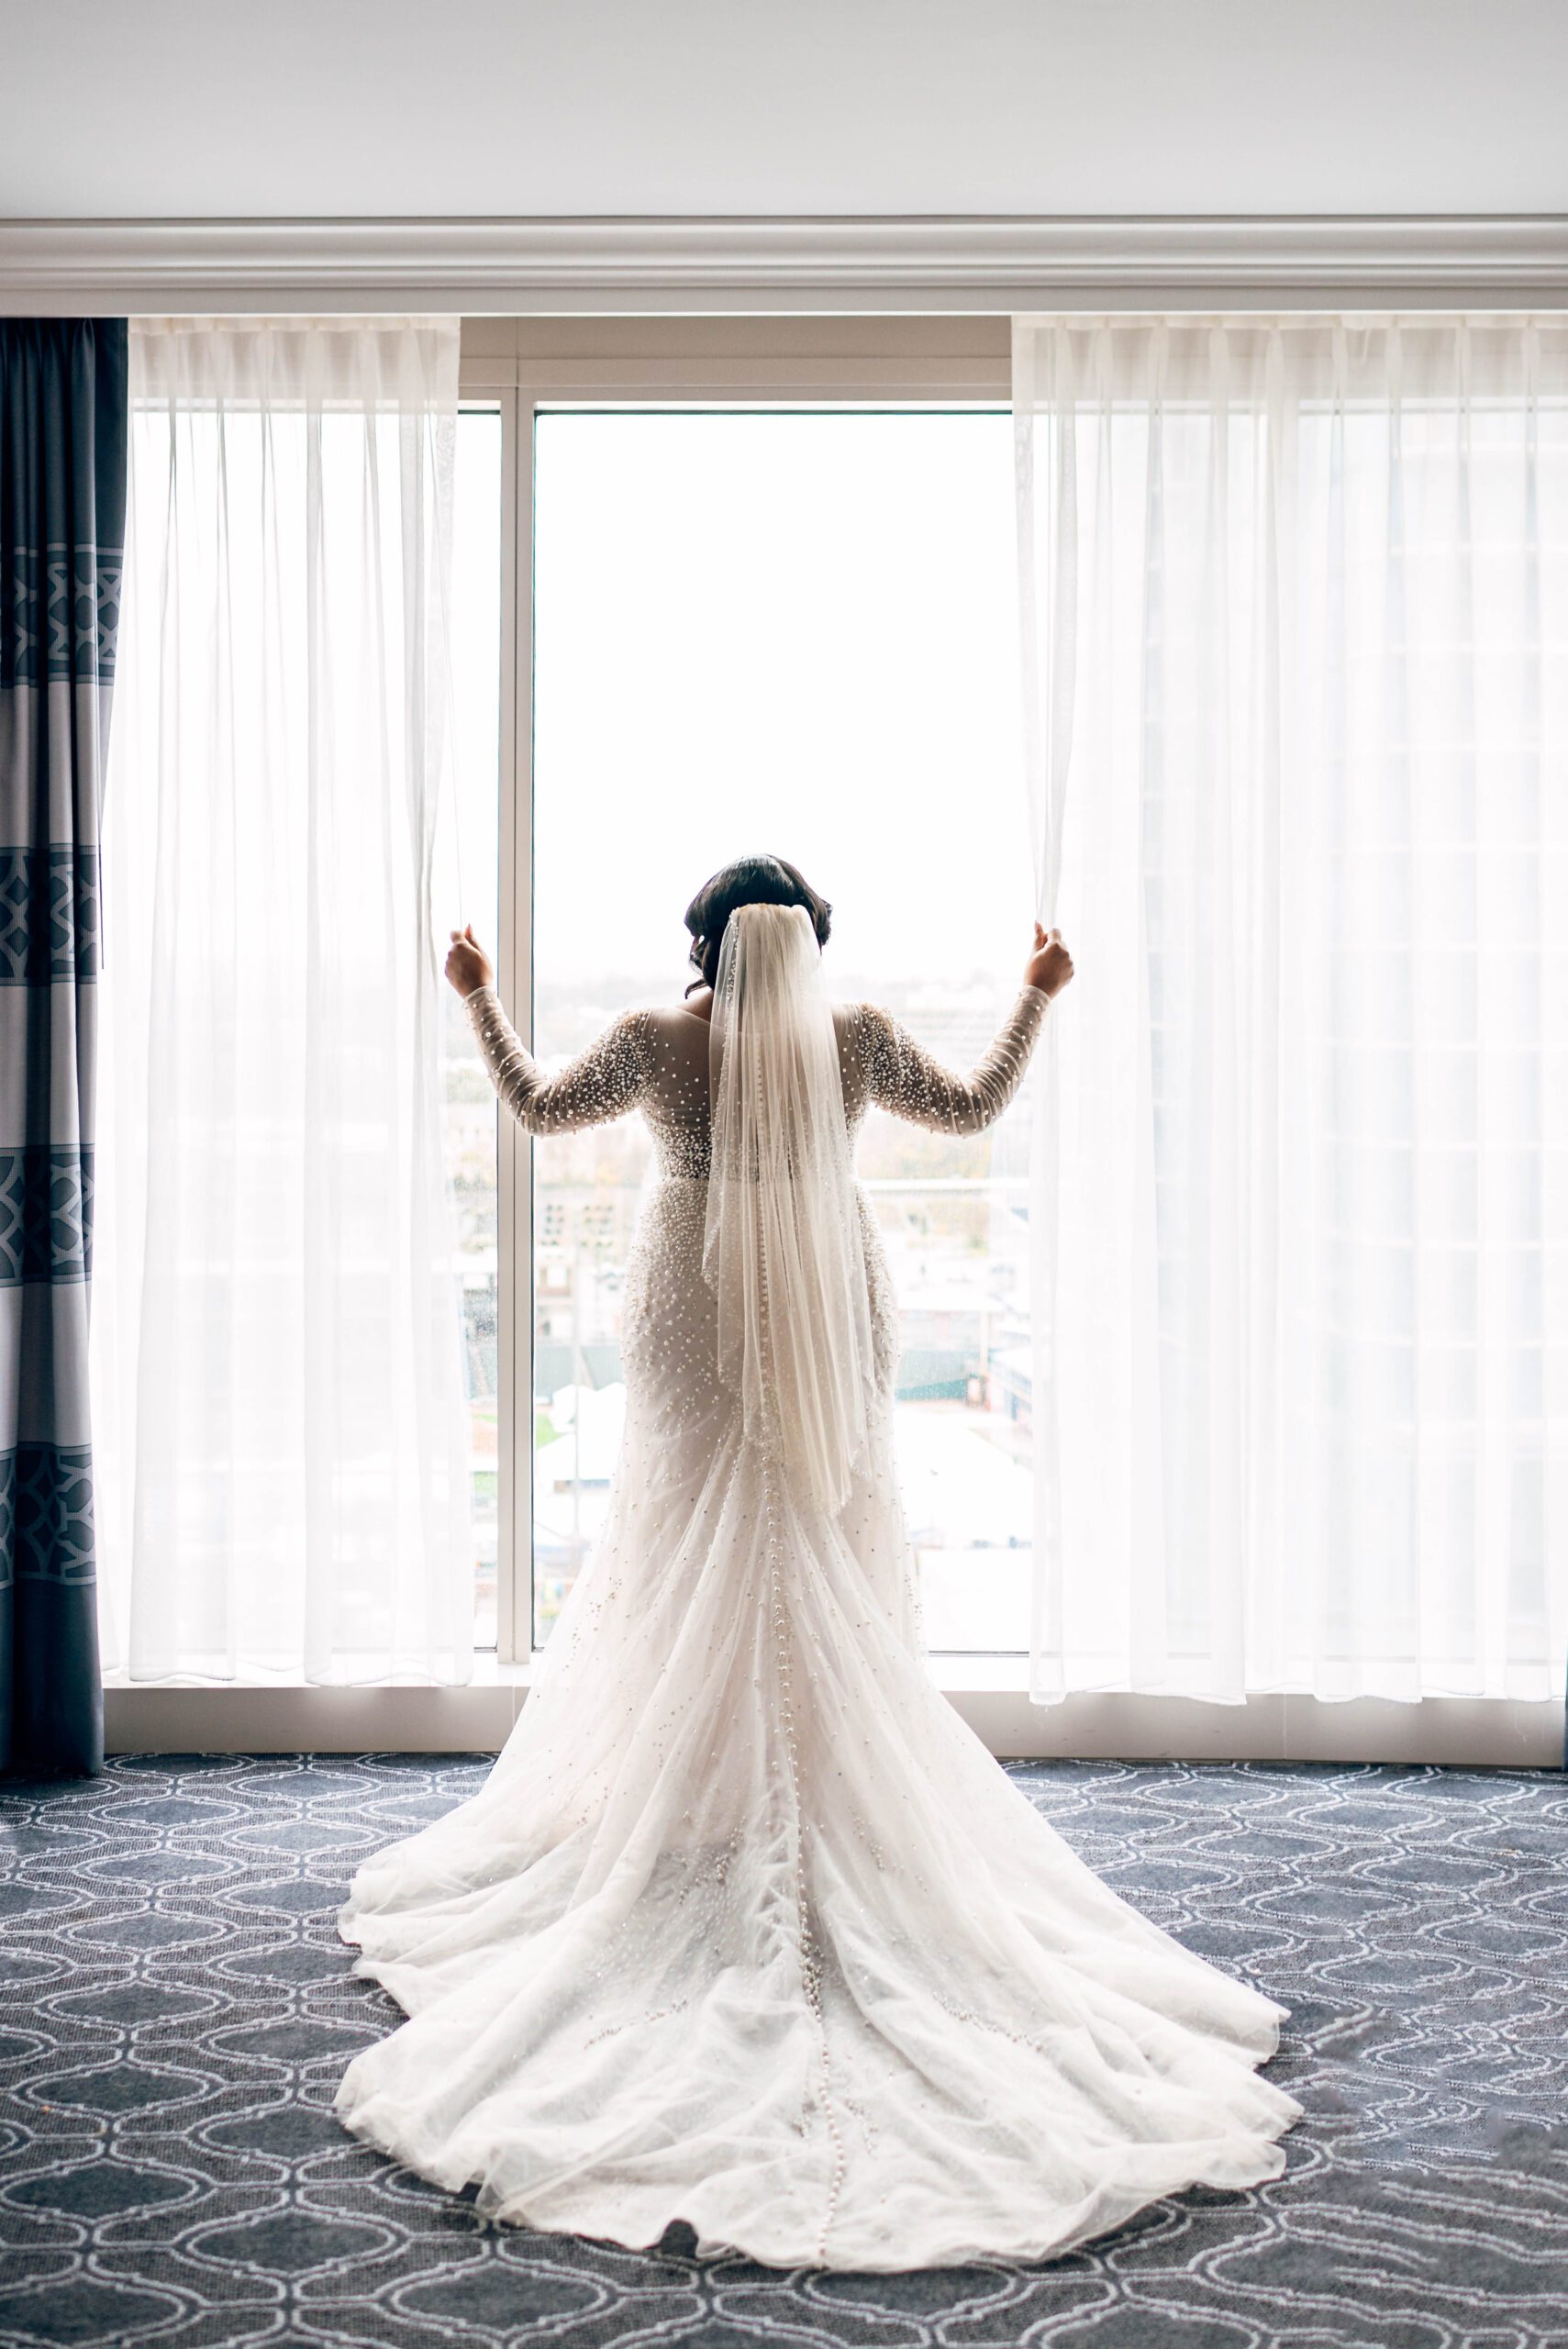 Bride in wedding dress looking out window at Kimpton Tryon Park hotel